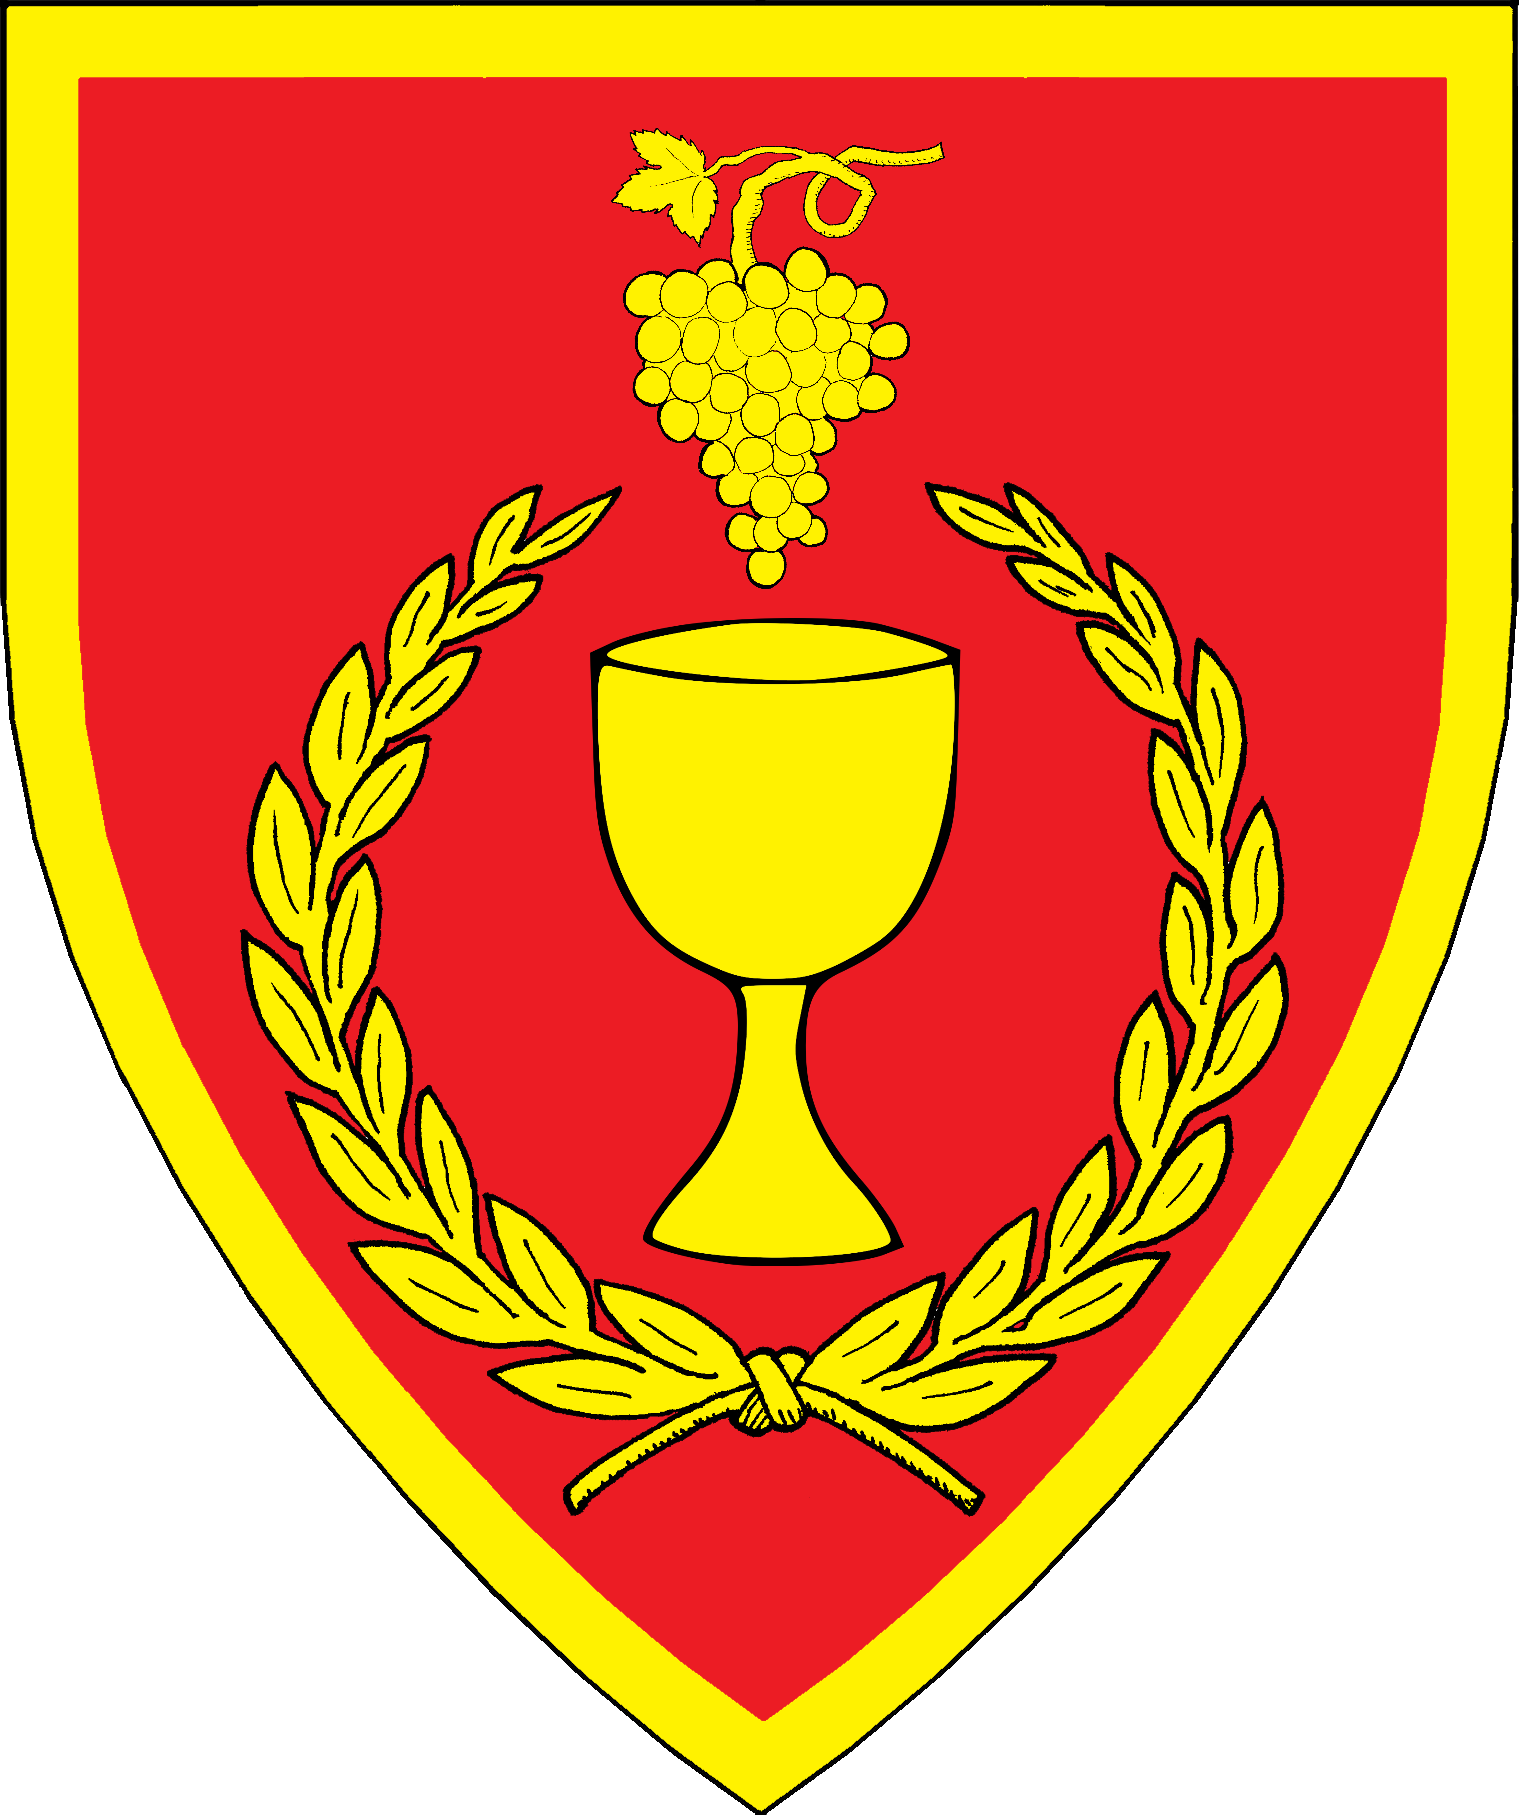 Arms of the college of Saint Golias